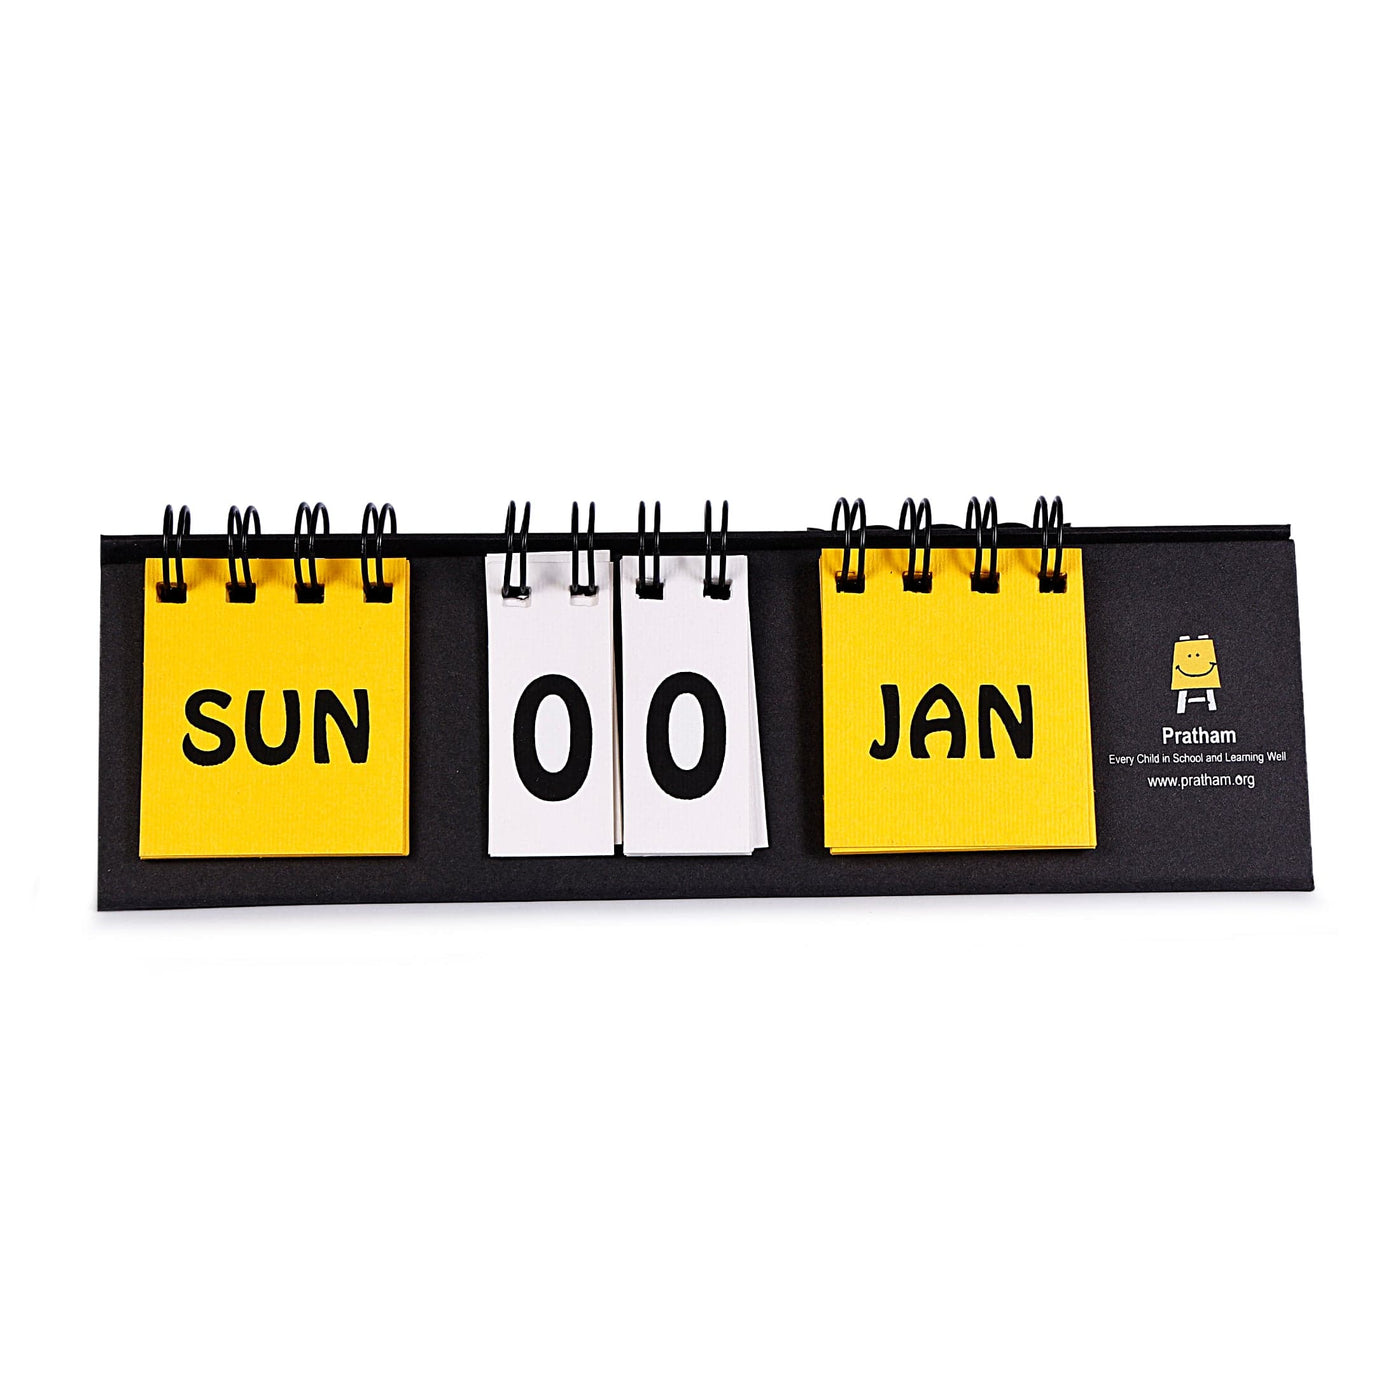 Gifts of Love Corporate Gifting Desk Calendar